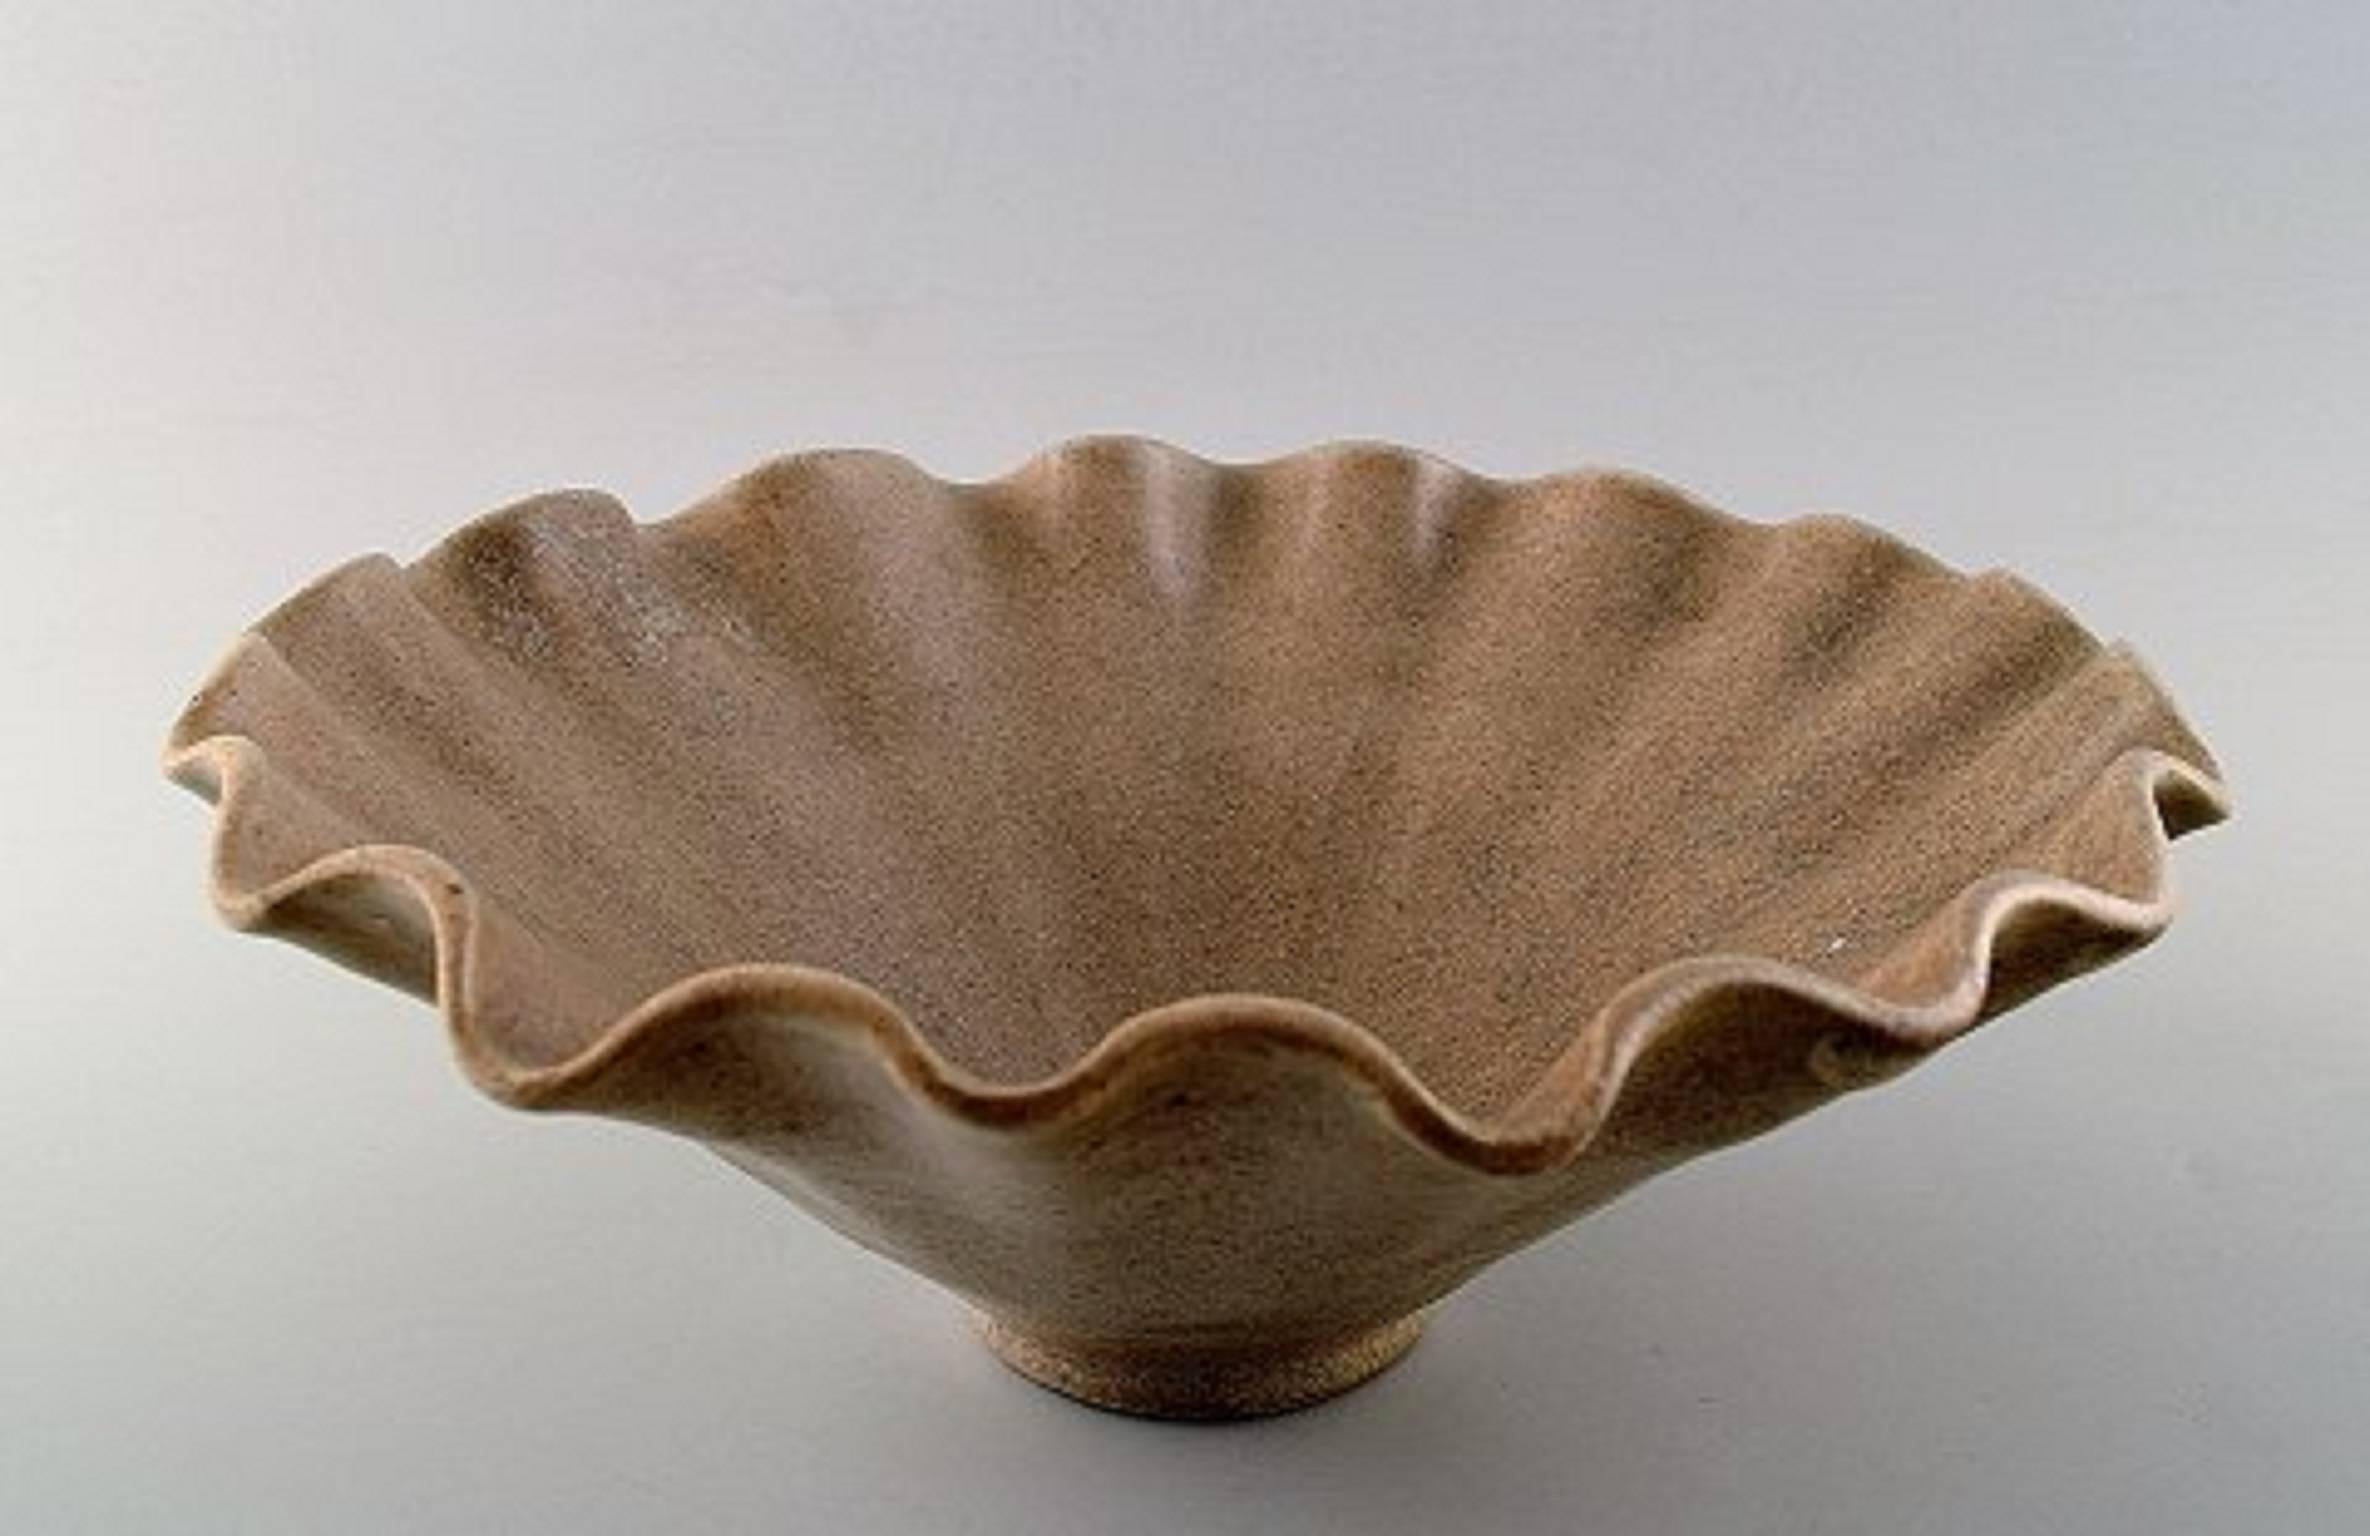 Arne Bang. Ceramics, large bowl.
Stamped AB 186. Beautiful glaze in sand colur shades.
In perfect condition. Height: 9 cm. Diameter: 23.5 cm.